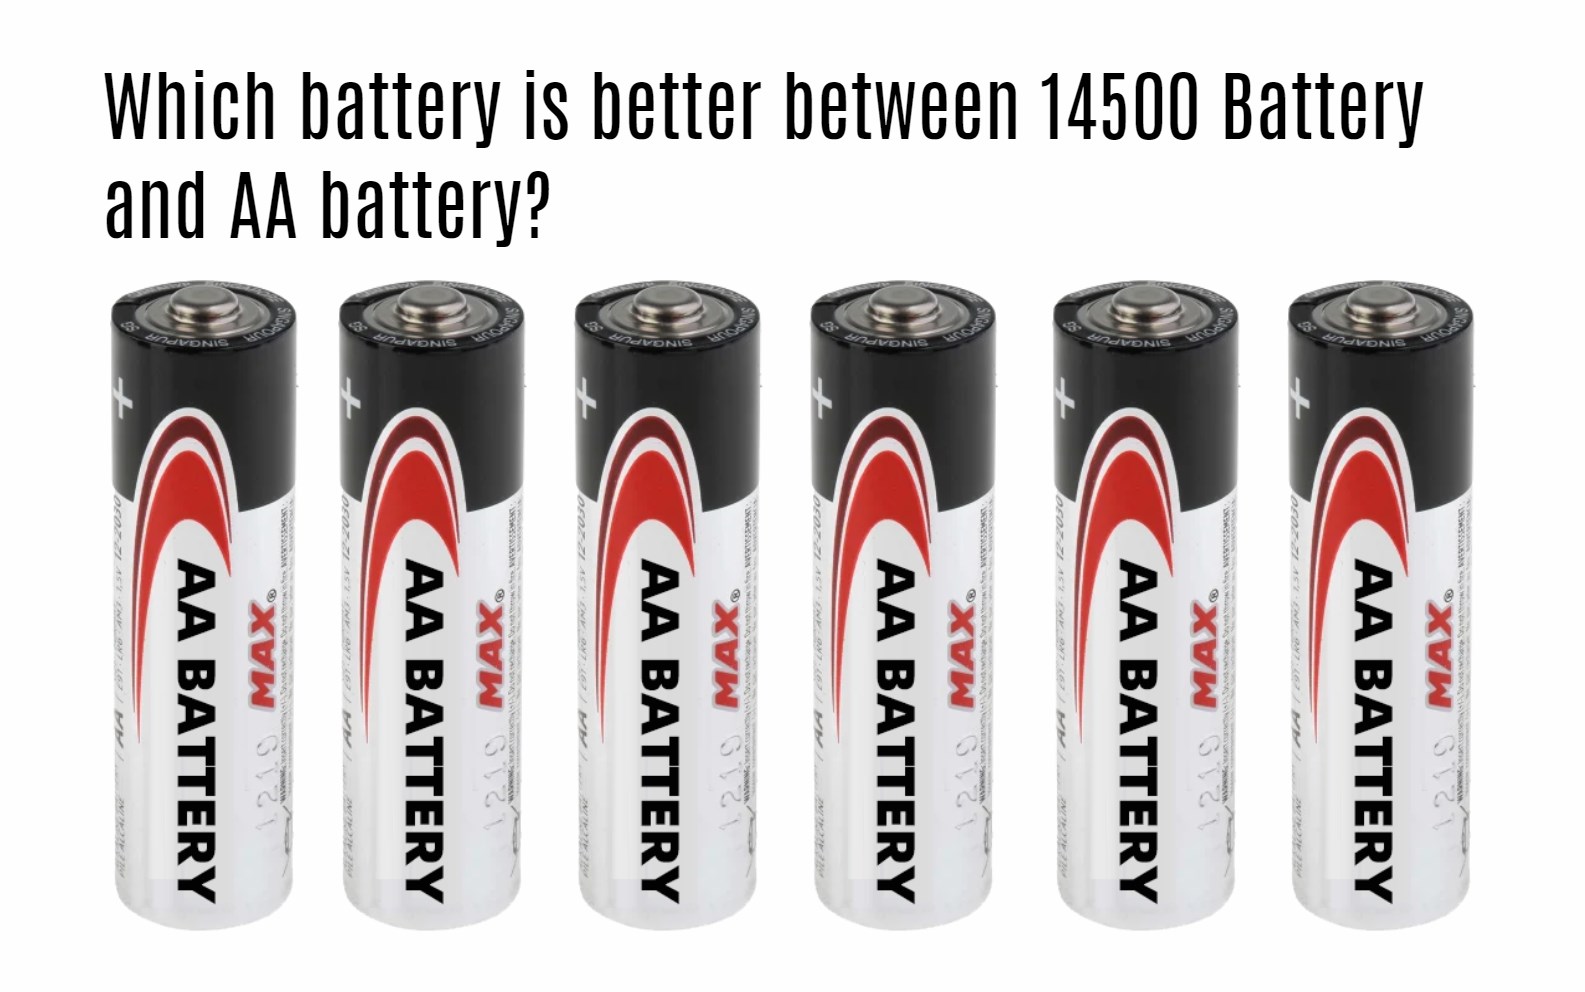 Which battery is better between 14500 Battery and AA battery?